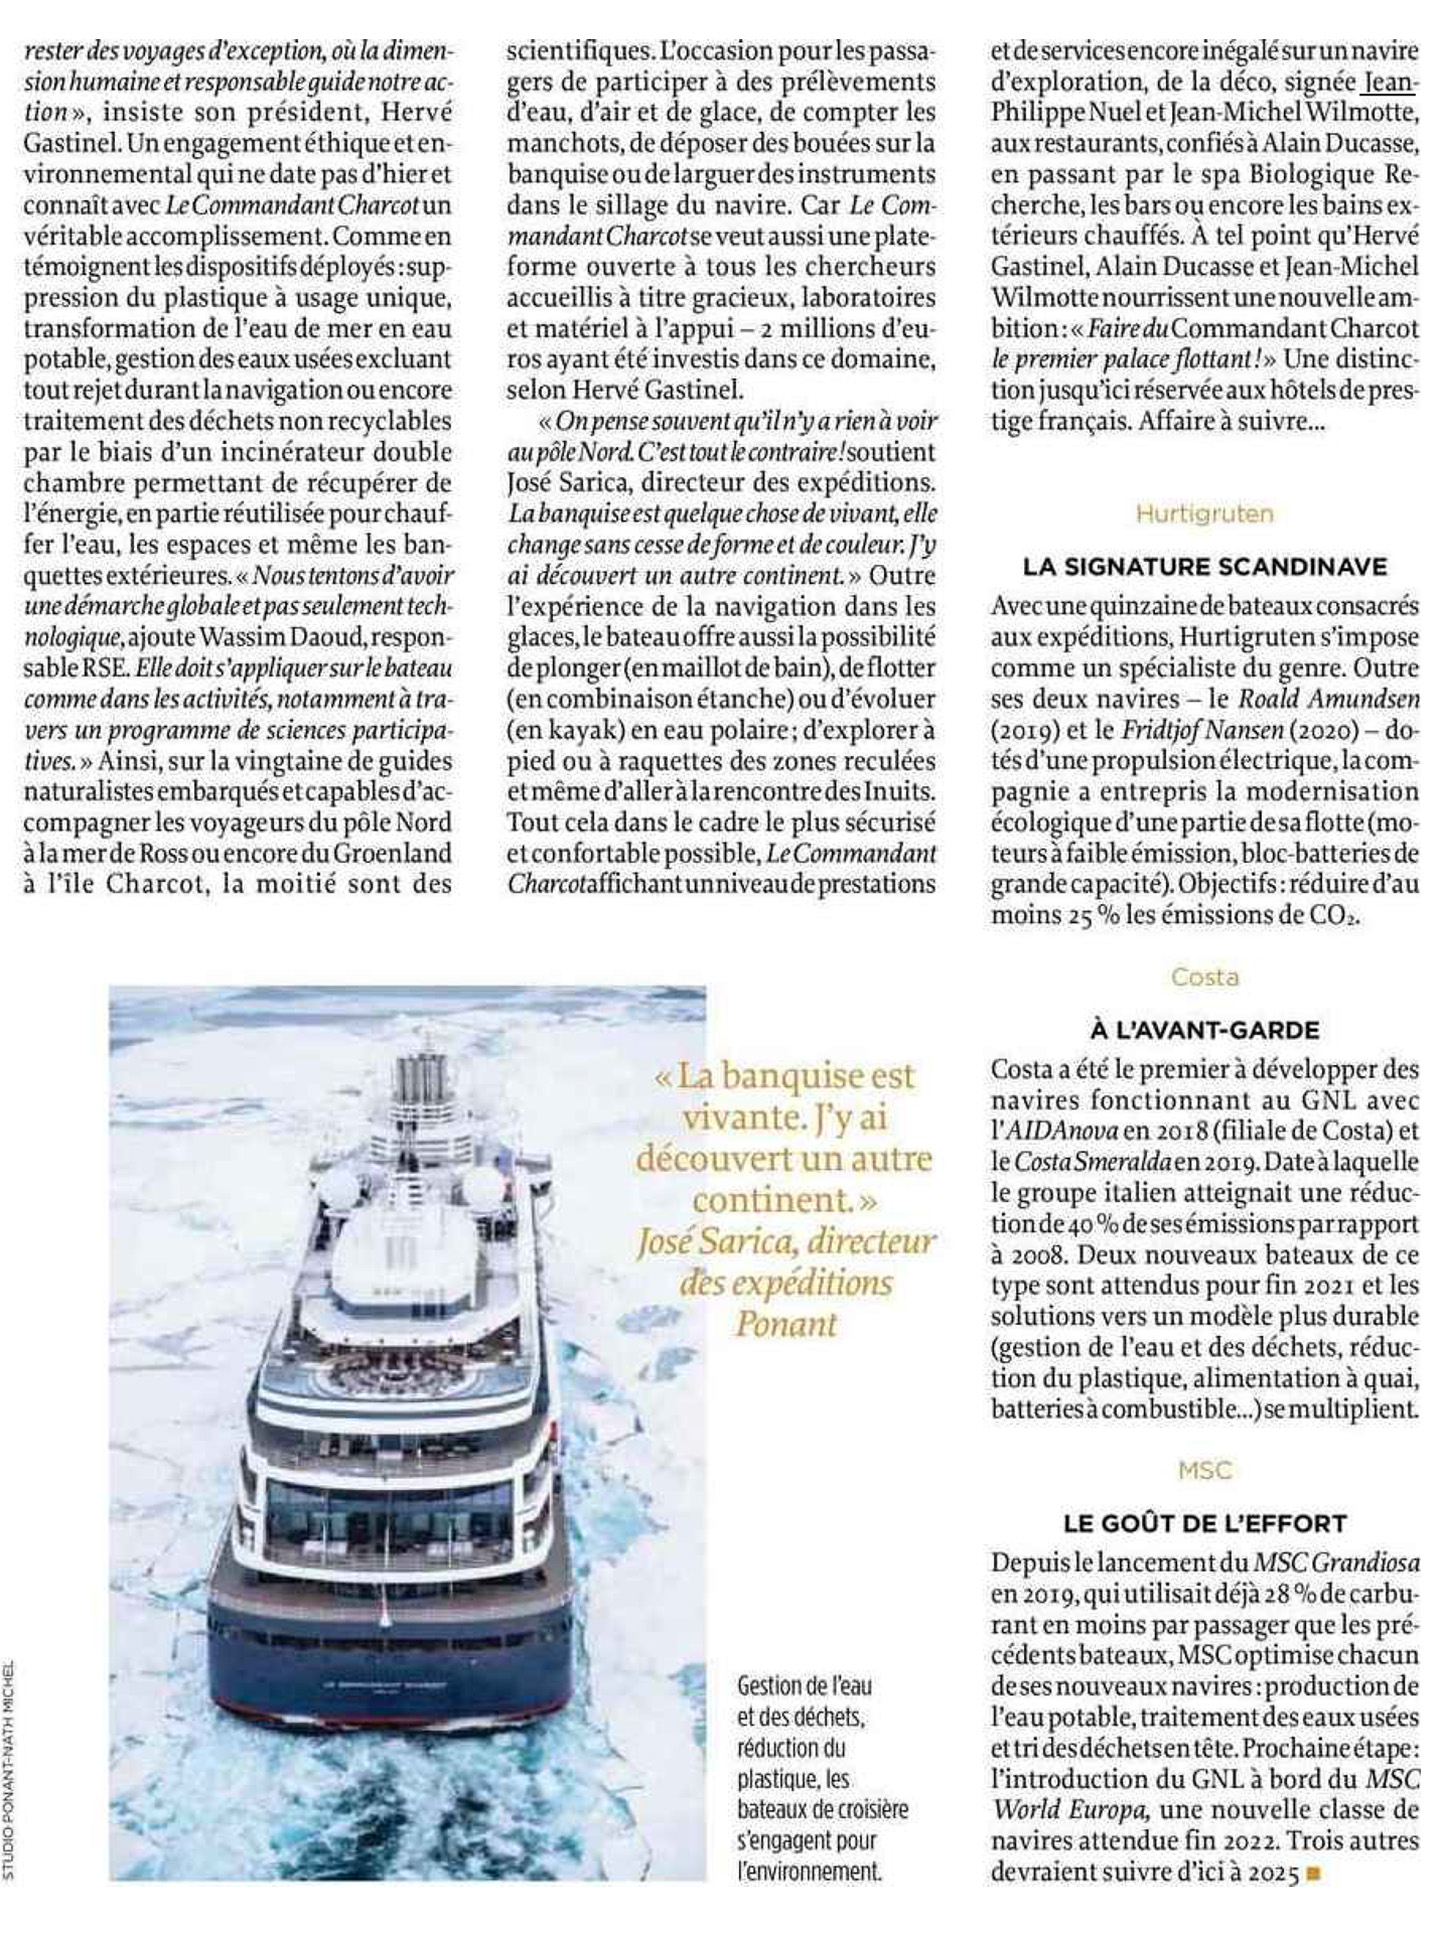 article on the commander charcot of ponant in Le Point, interior design by jean-philippe nuel, luxury polar expedition ship, cruise, luxury ship, interior design